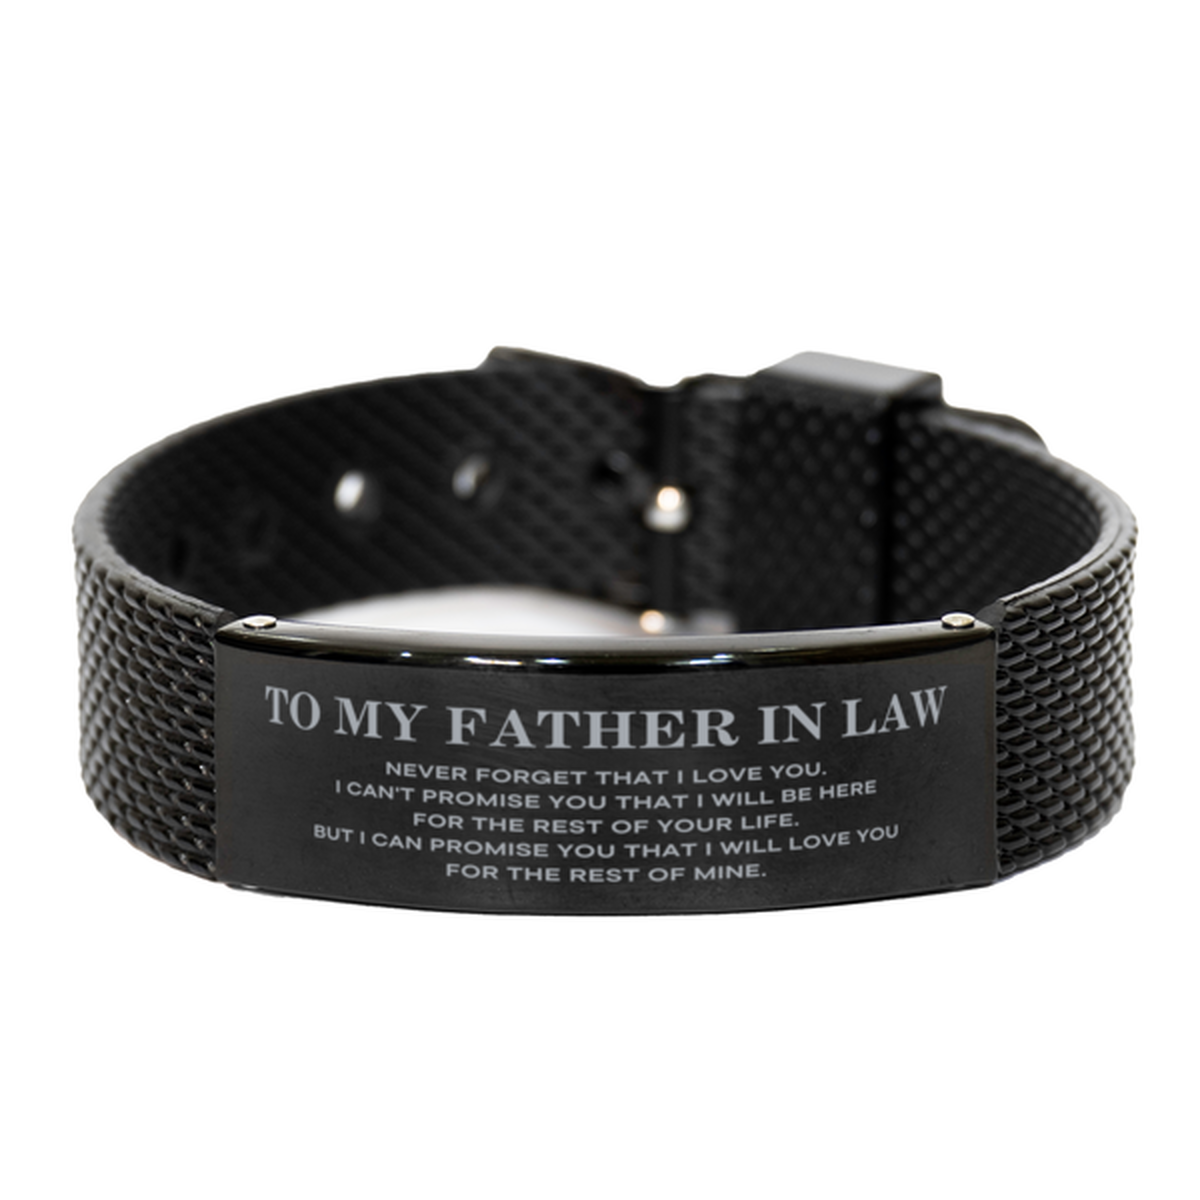 To My Father In Law Gifts, I will love you for the rest of mine, Love Father In Law Bracelet, Birthday Christmas Unique Black Shark Mesh Bracelet For Father In Law